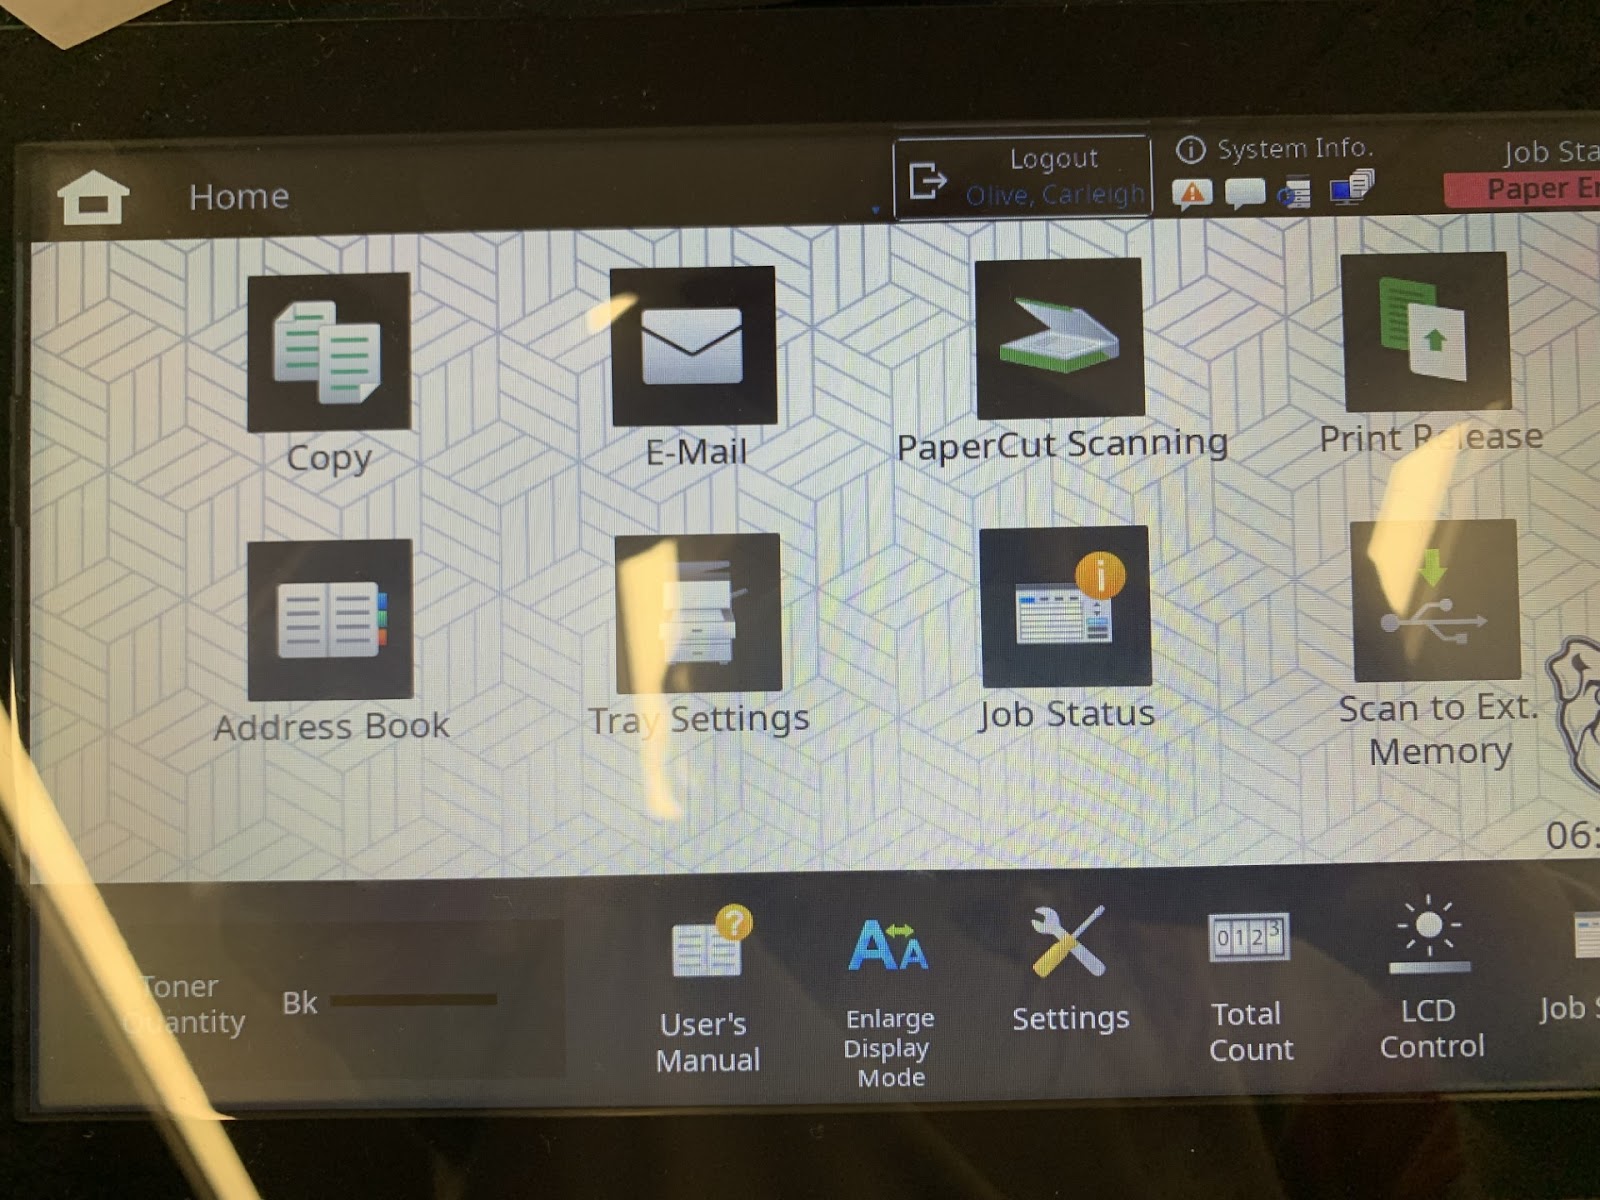 The screen of the copier showing two rows of options to choose from. The top row (from left to right): copy, e-mail, PaperCut Scanning, and print release. The bottom row (left to right): address bok, tray settings, job status, scan to Ext. memory. 